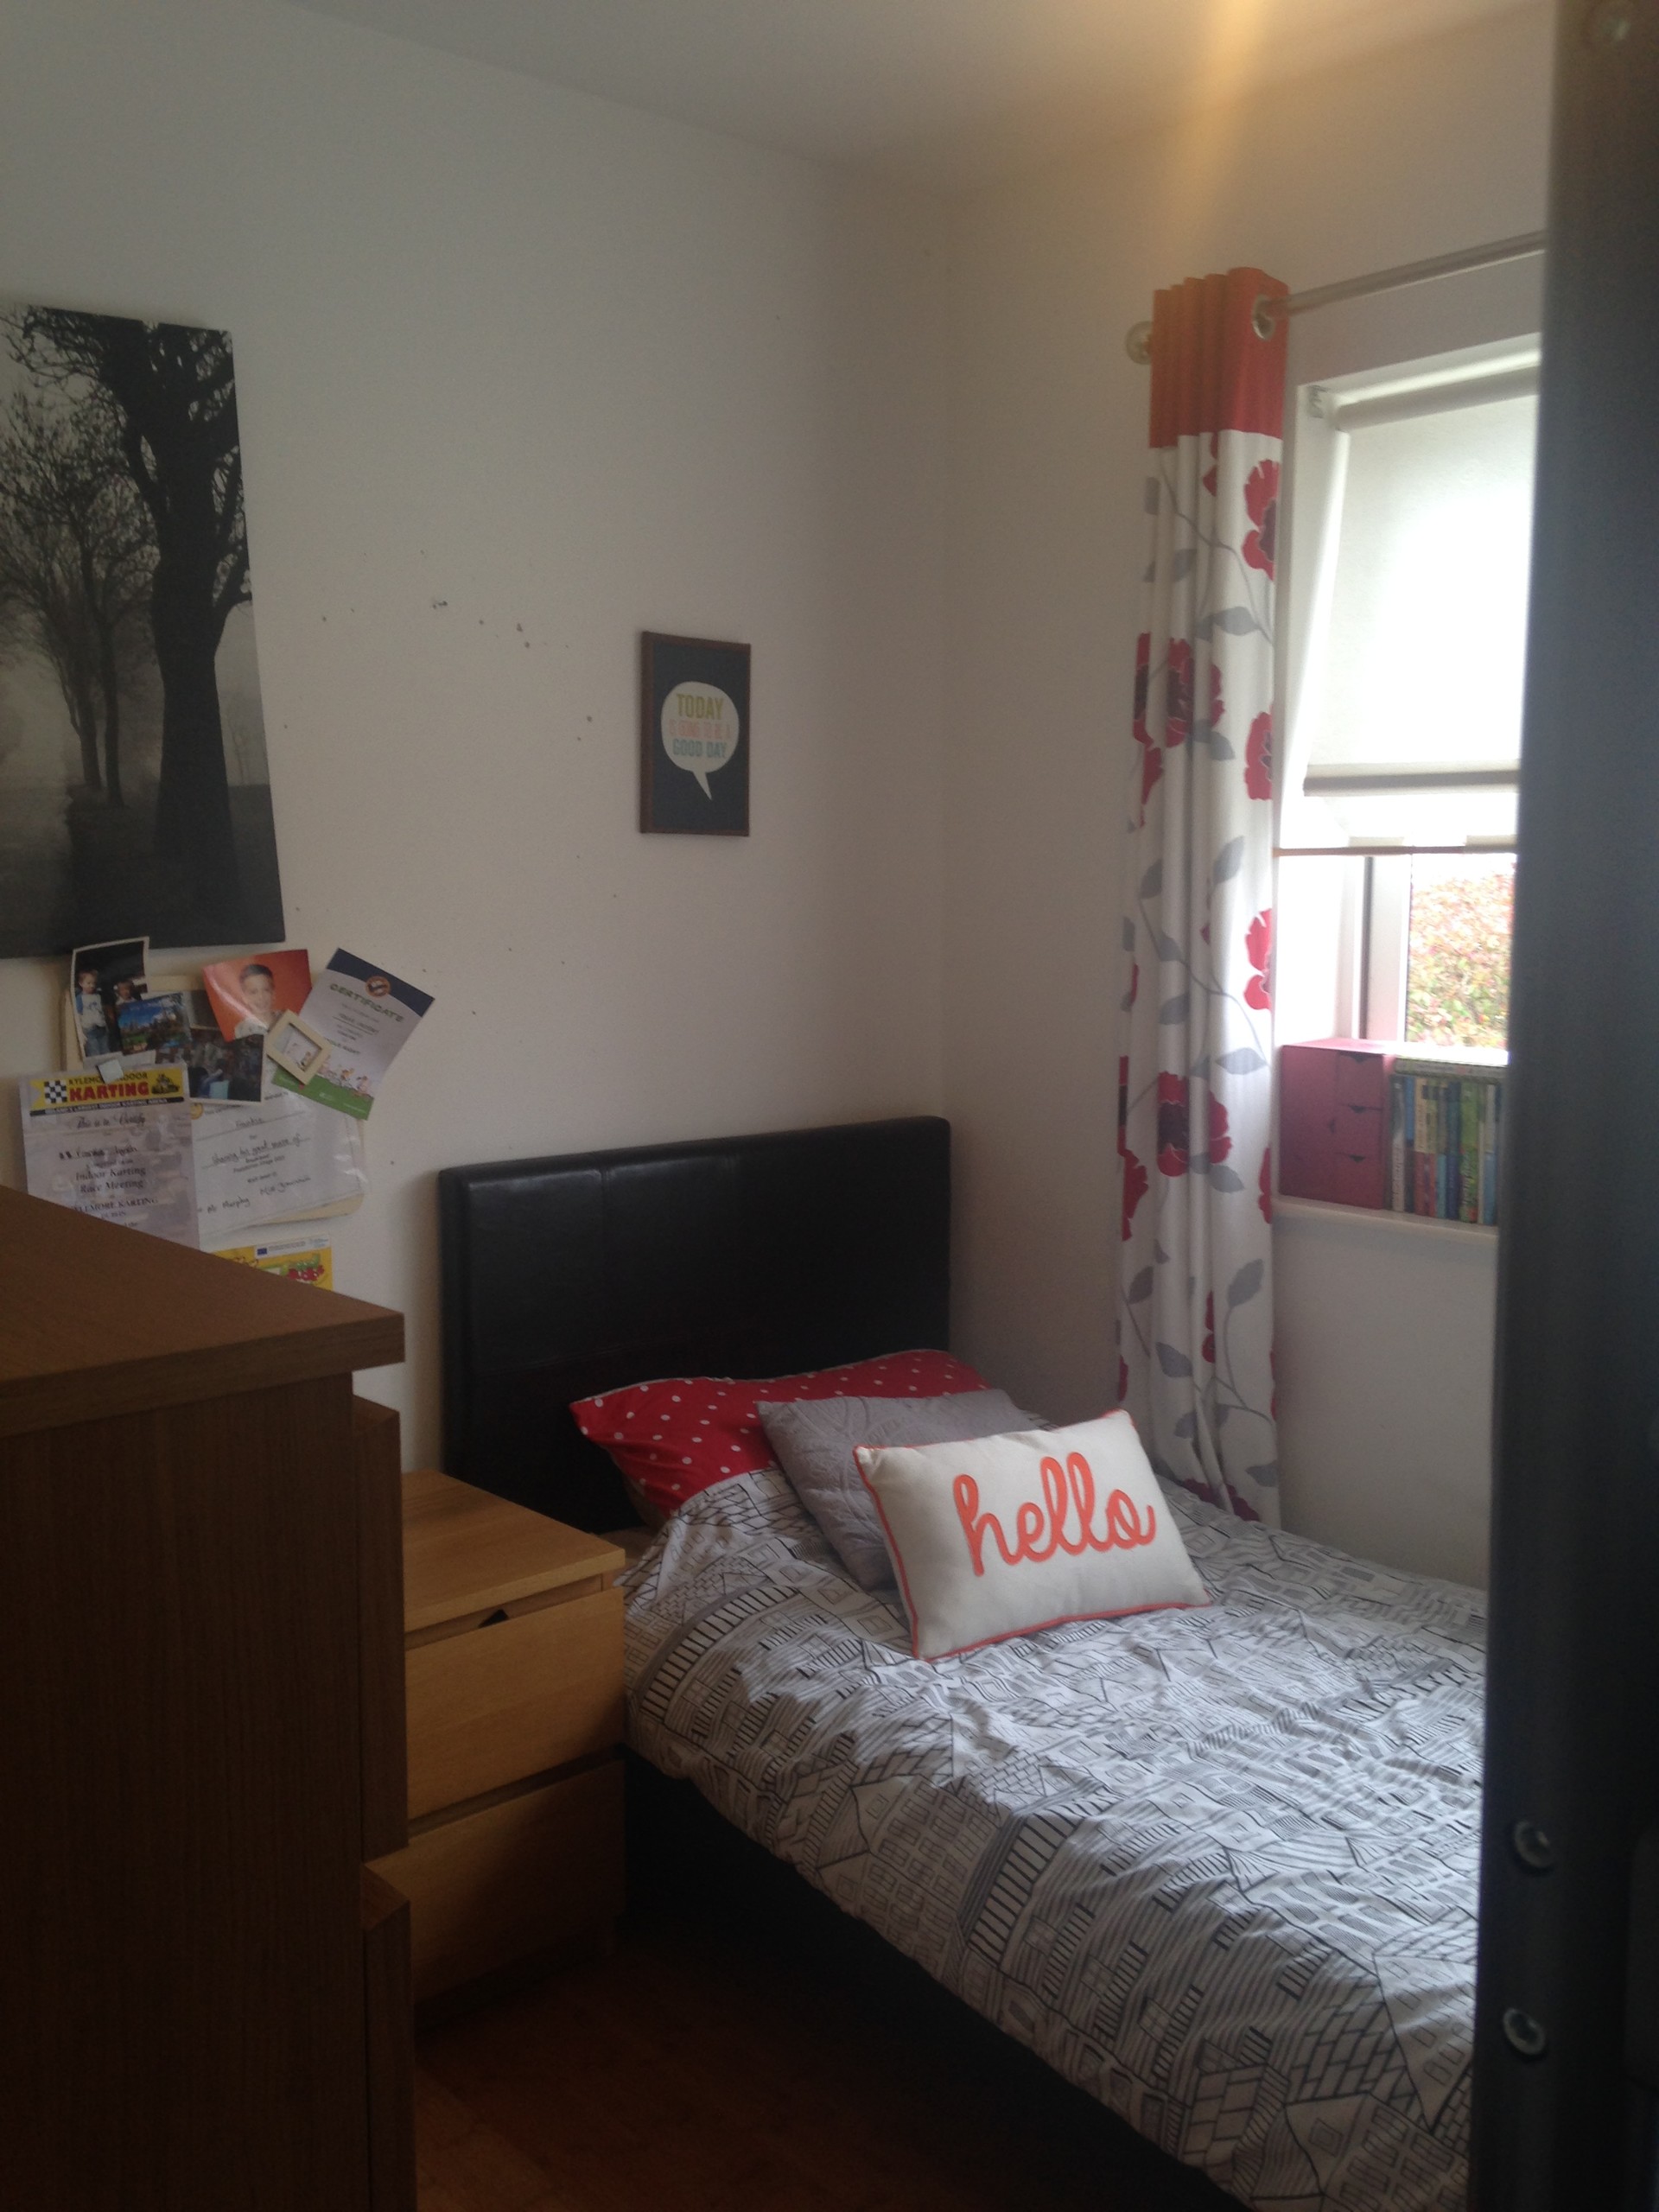 Room for rent for one month | Room for rent Dublin